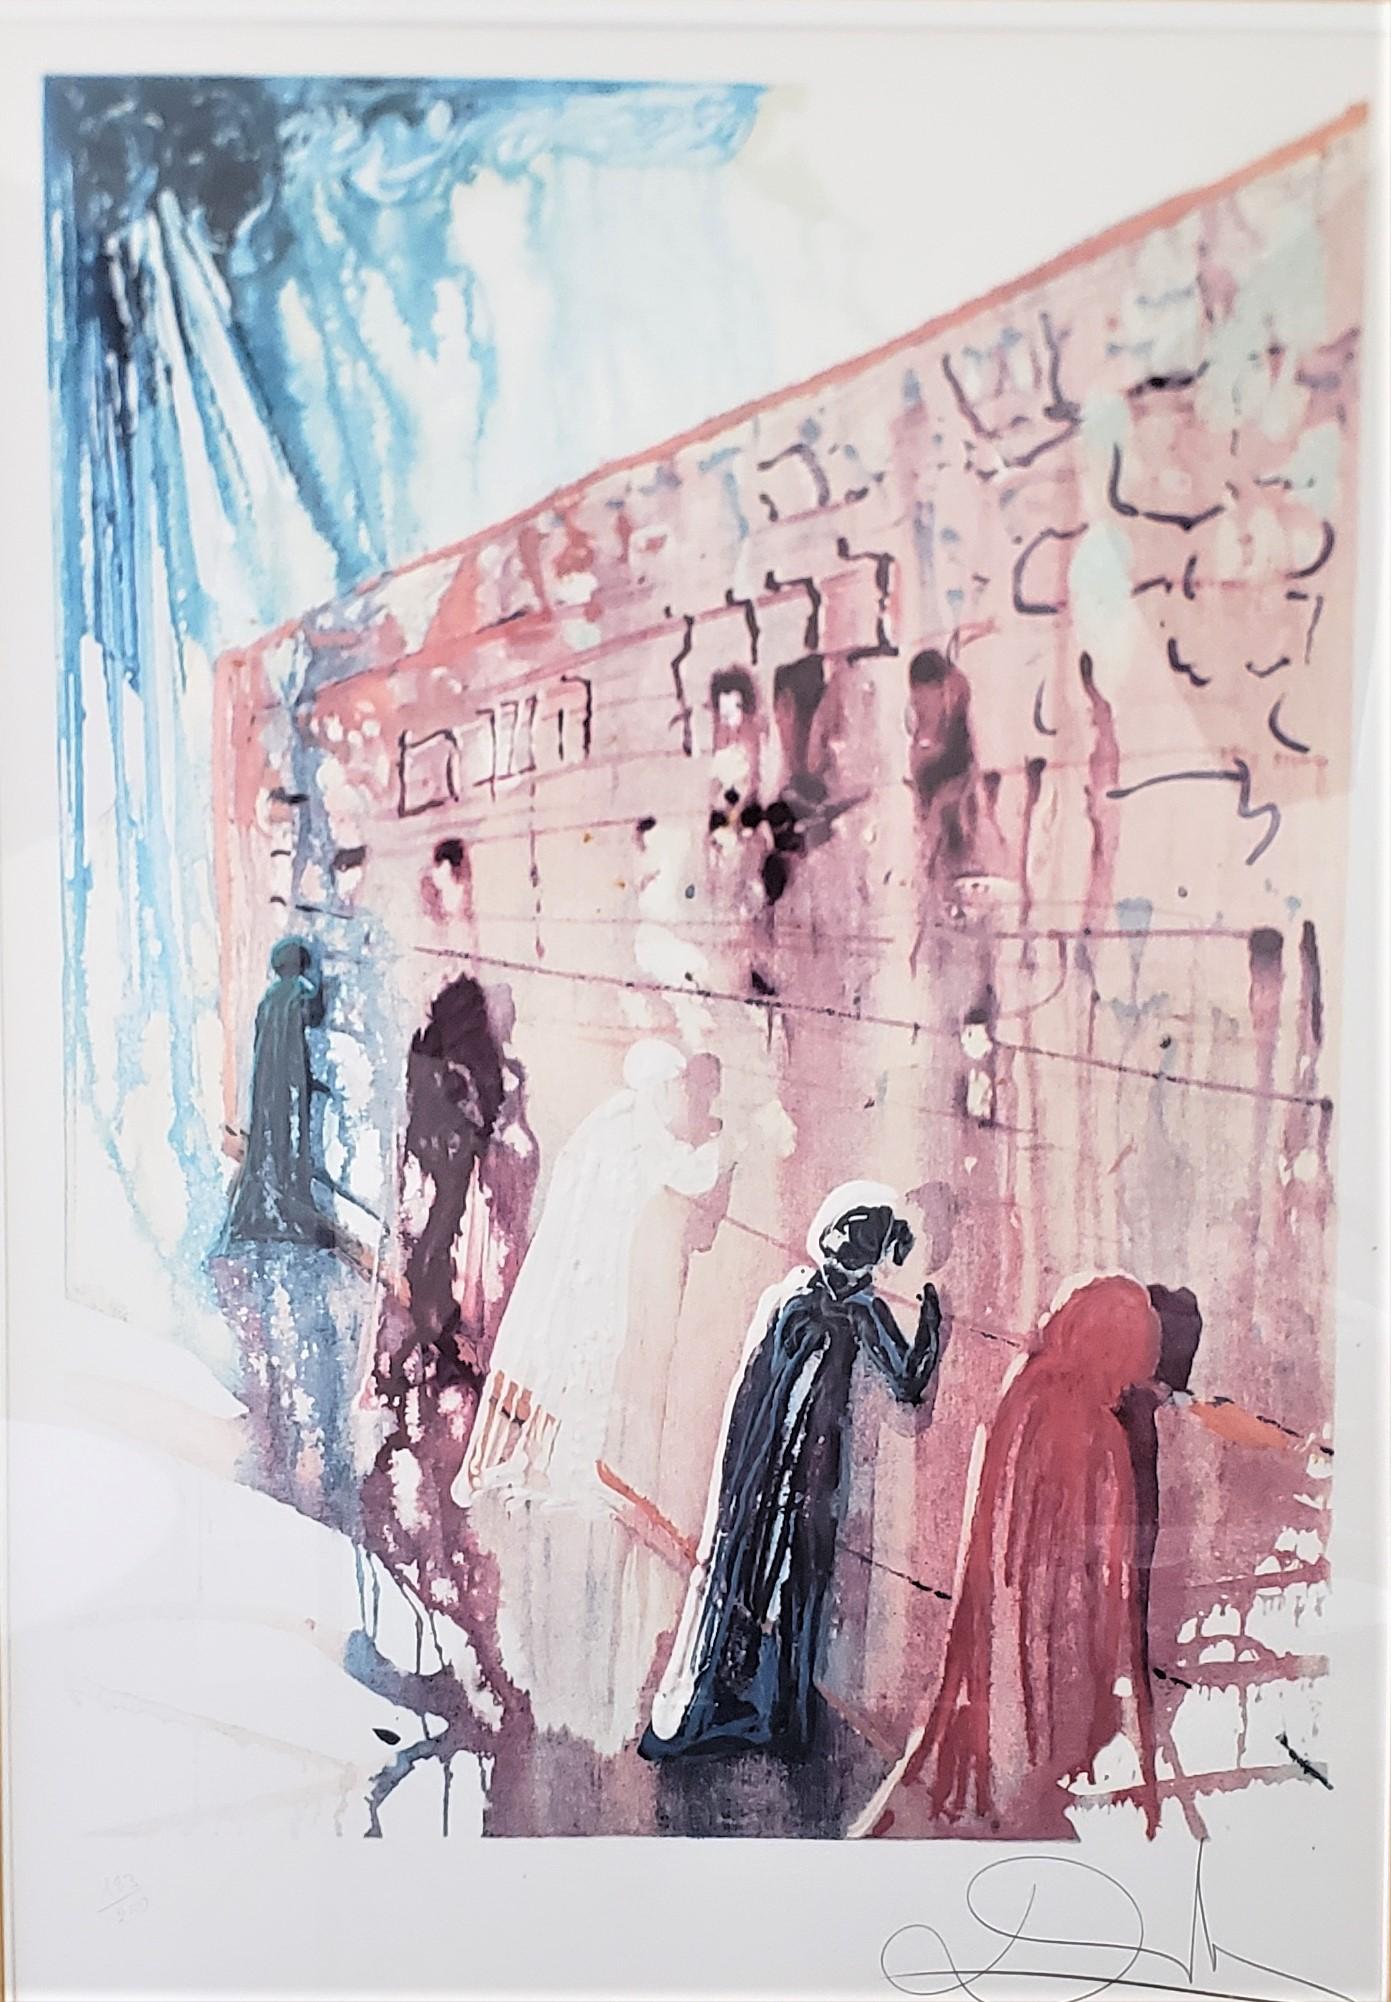 This very large signed lithograph was done by the world renowned Savadore Dali of Spain in approximately 1970 in his signature Surrealistic style. The lithograph is titled 